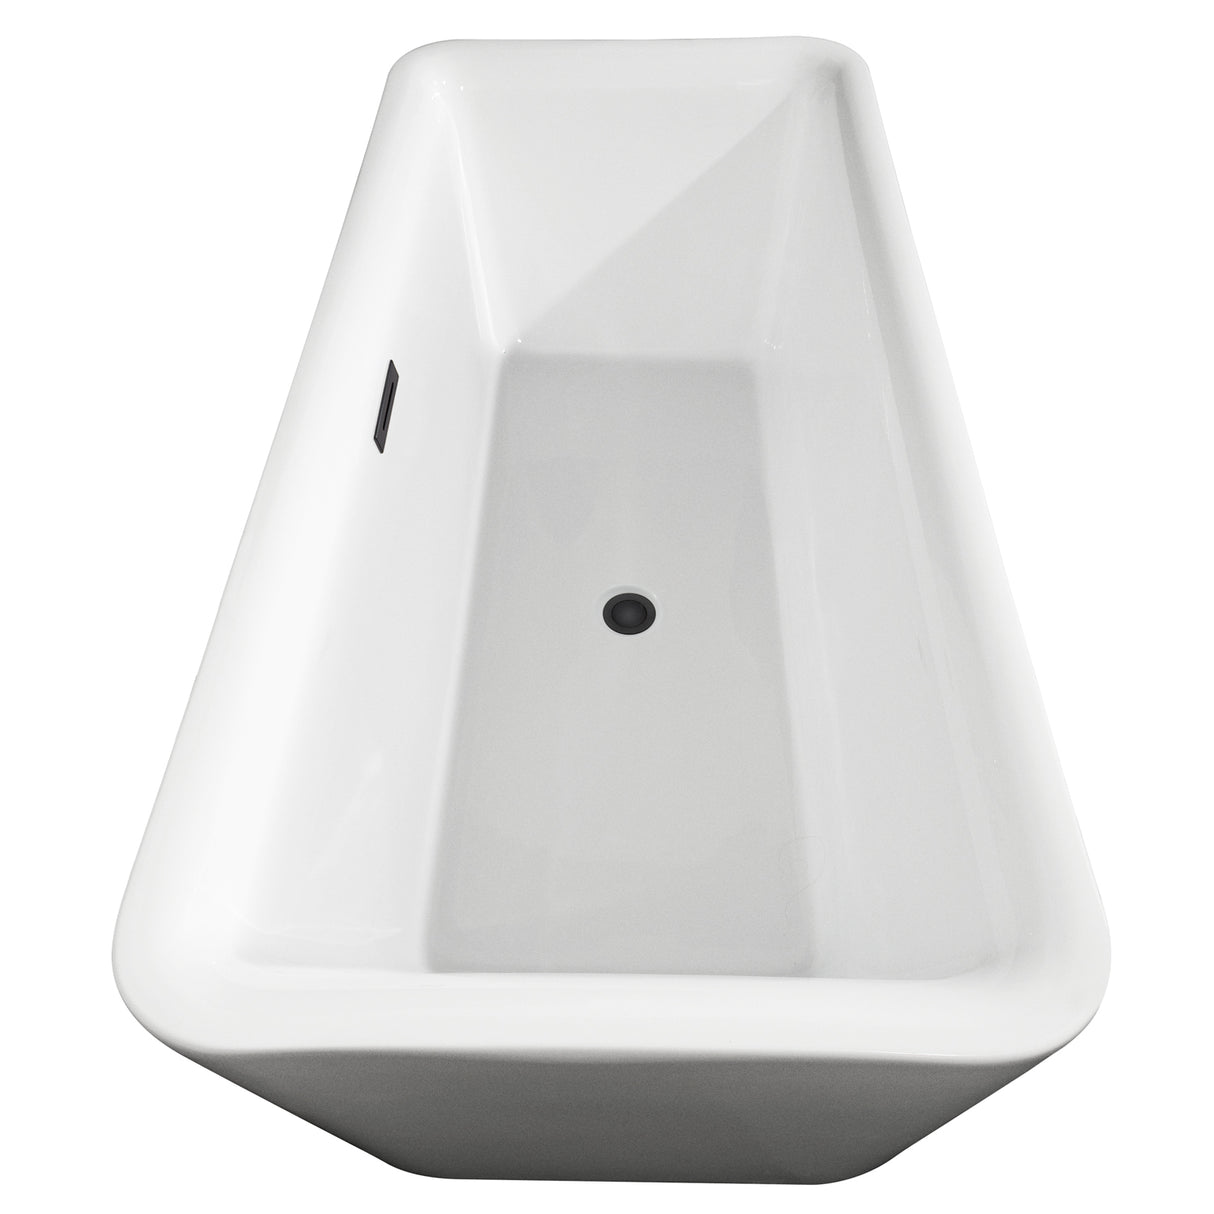 Emily 69 Inch Freestanding Bathtub in White with Floor Mounted Faucet Drain and Overflow Trim in Matte Black